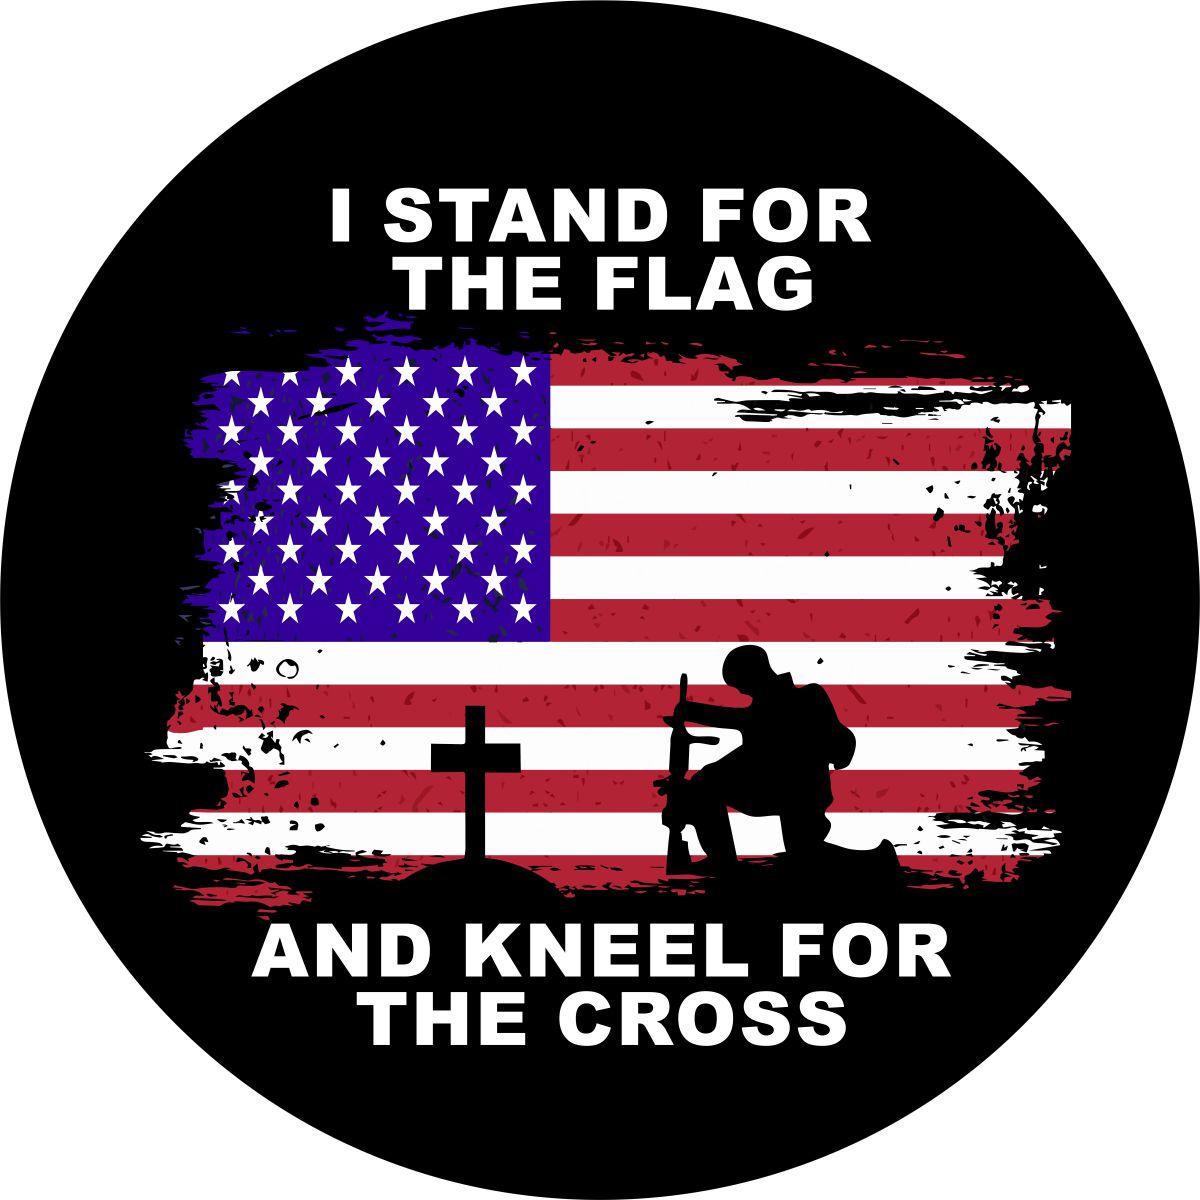 The saying 'I Stand for the Flag and Kneel for the Cross' with a rustic American flag and a soldier kneeling at a cross as a spare tire cover design example